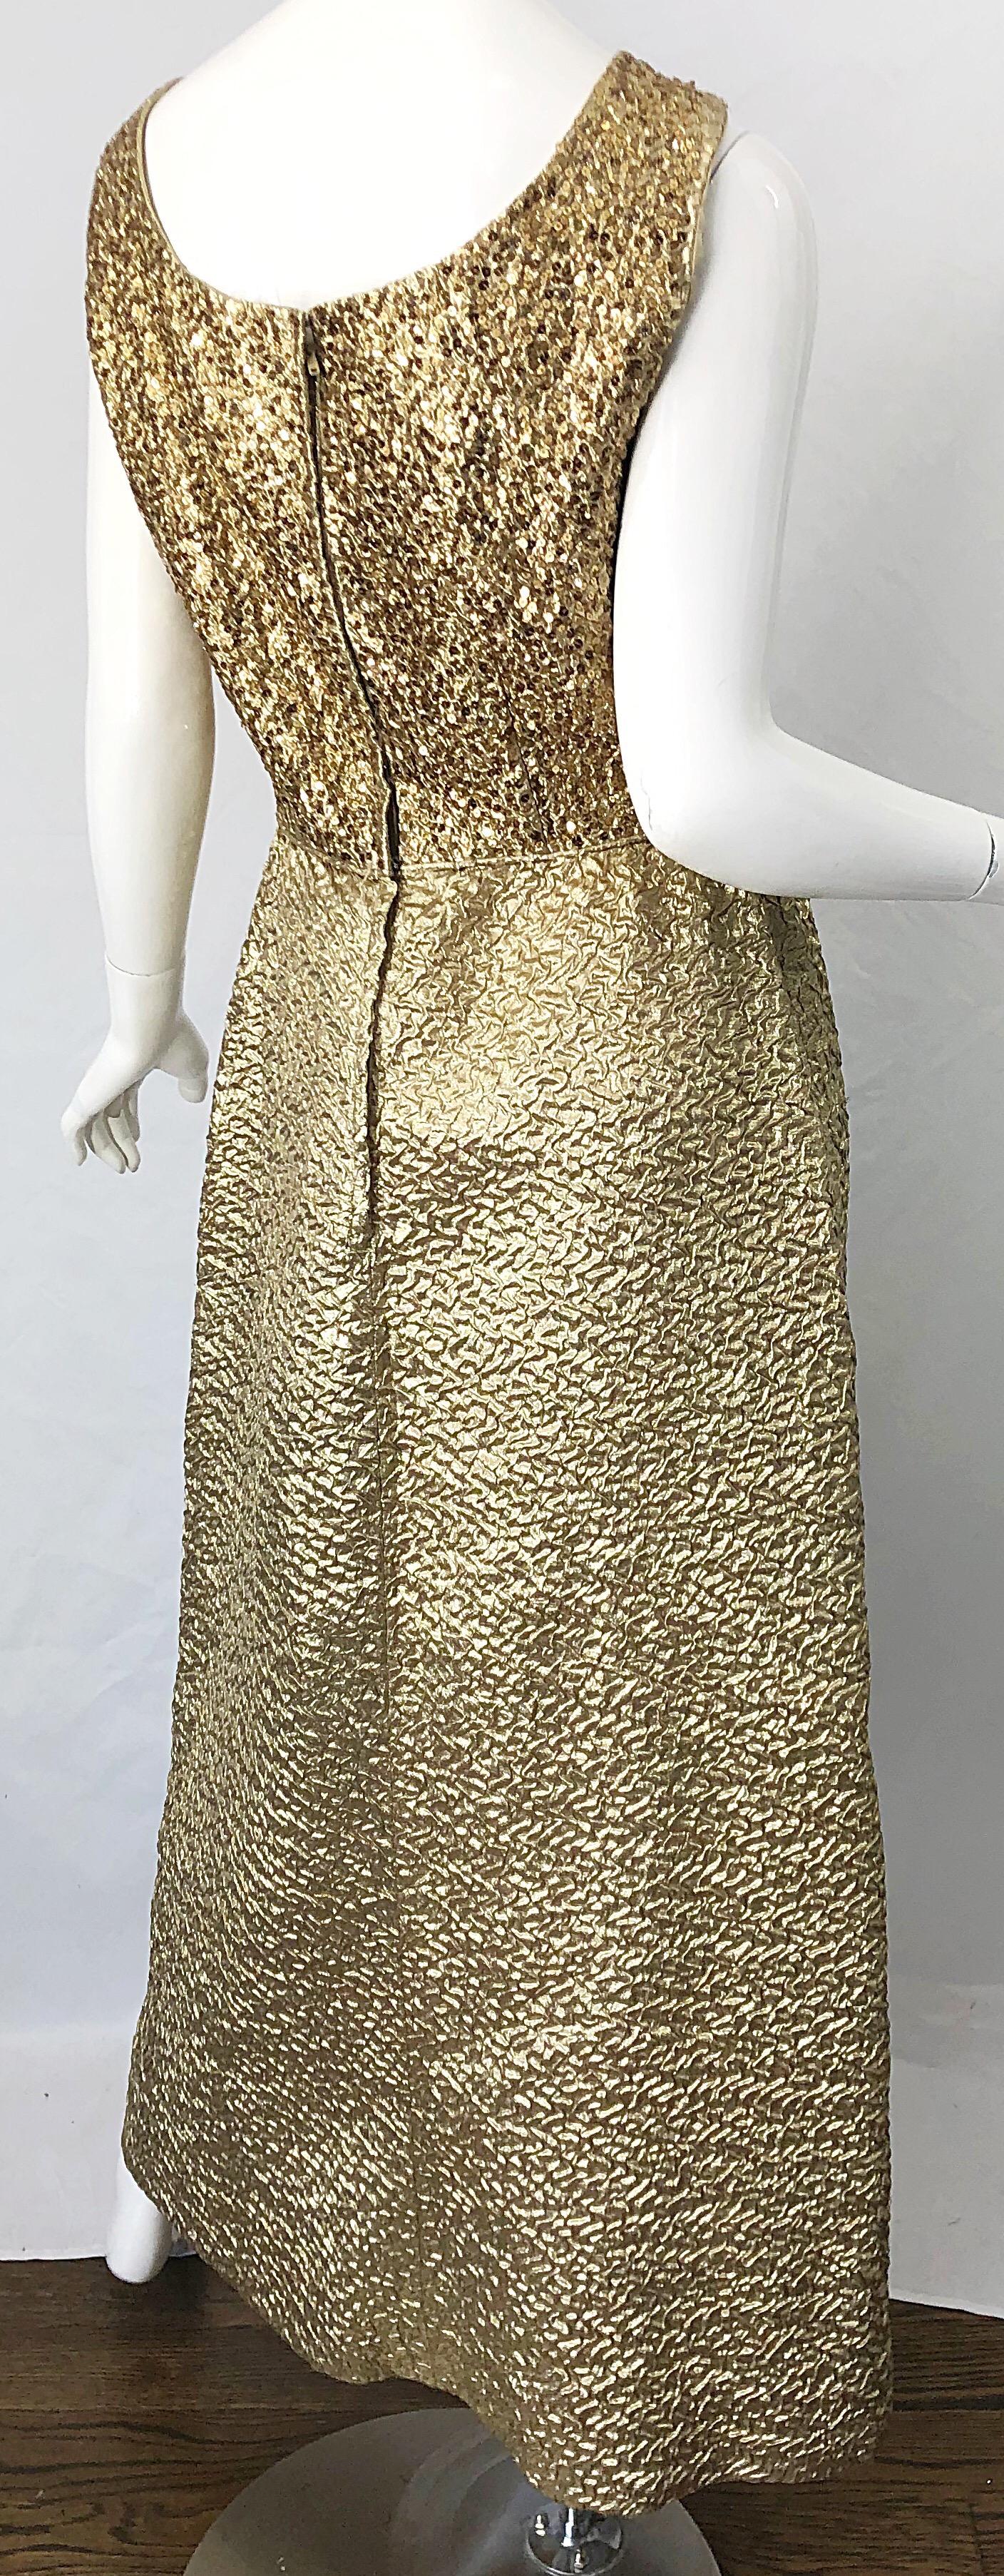 1960s Nat Kaplan Gold Sequin Rhinestone Encrusted Vintage 60s Evening Gown Dress For Sale 6